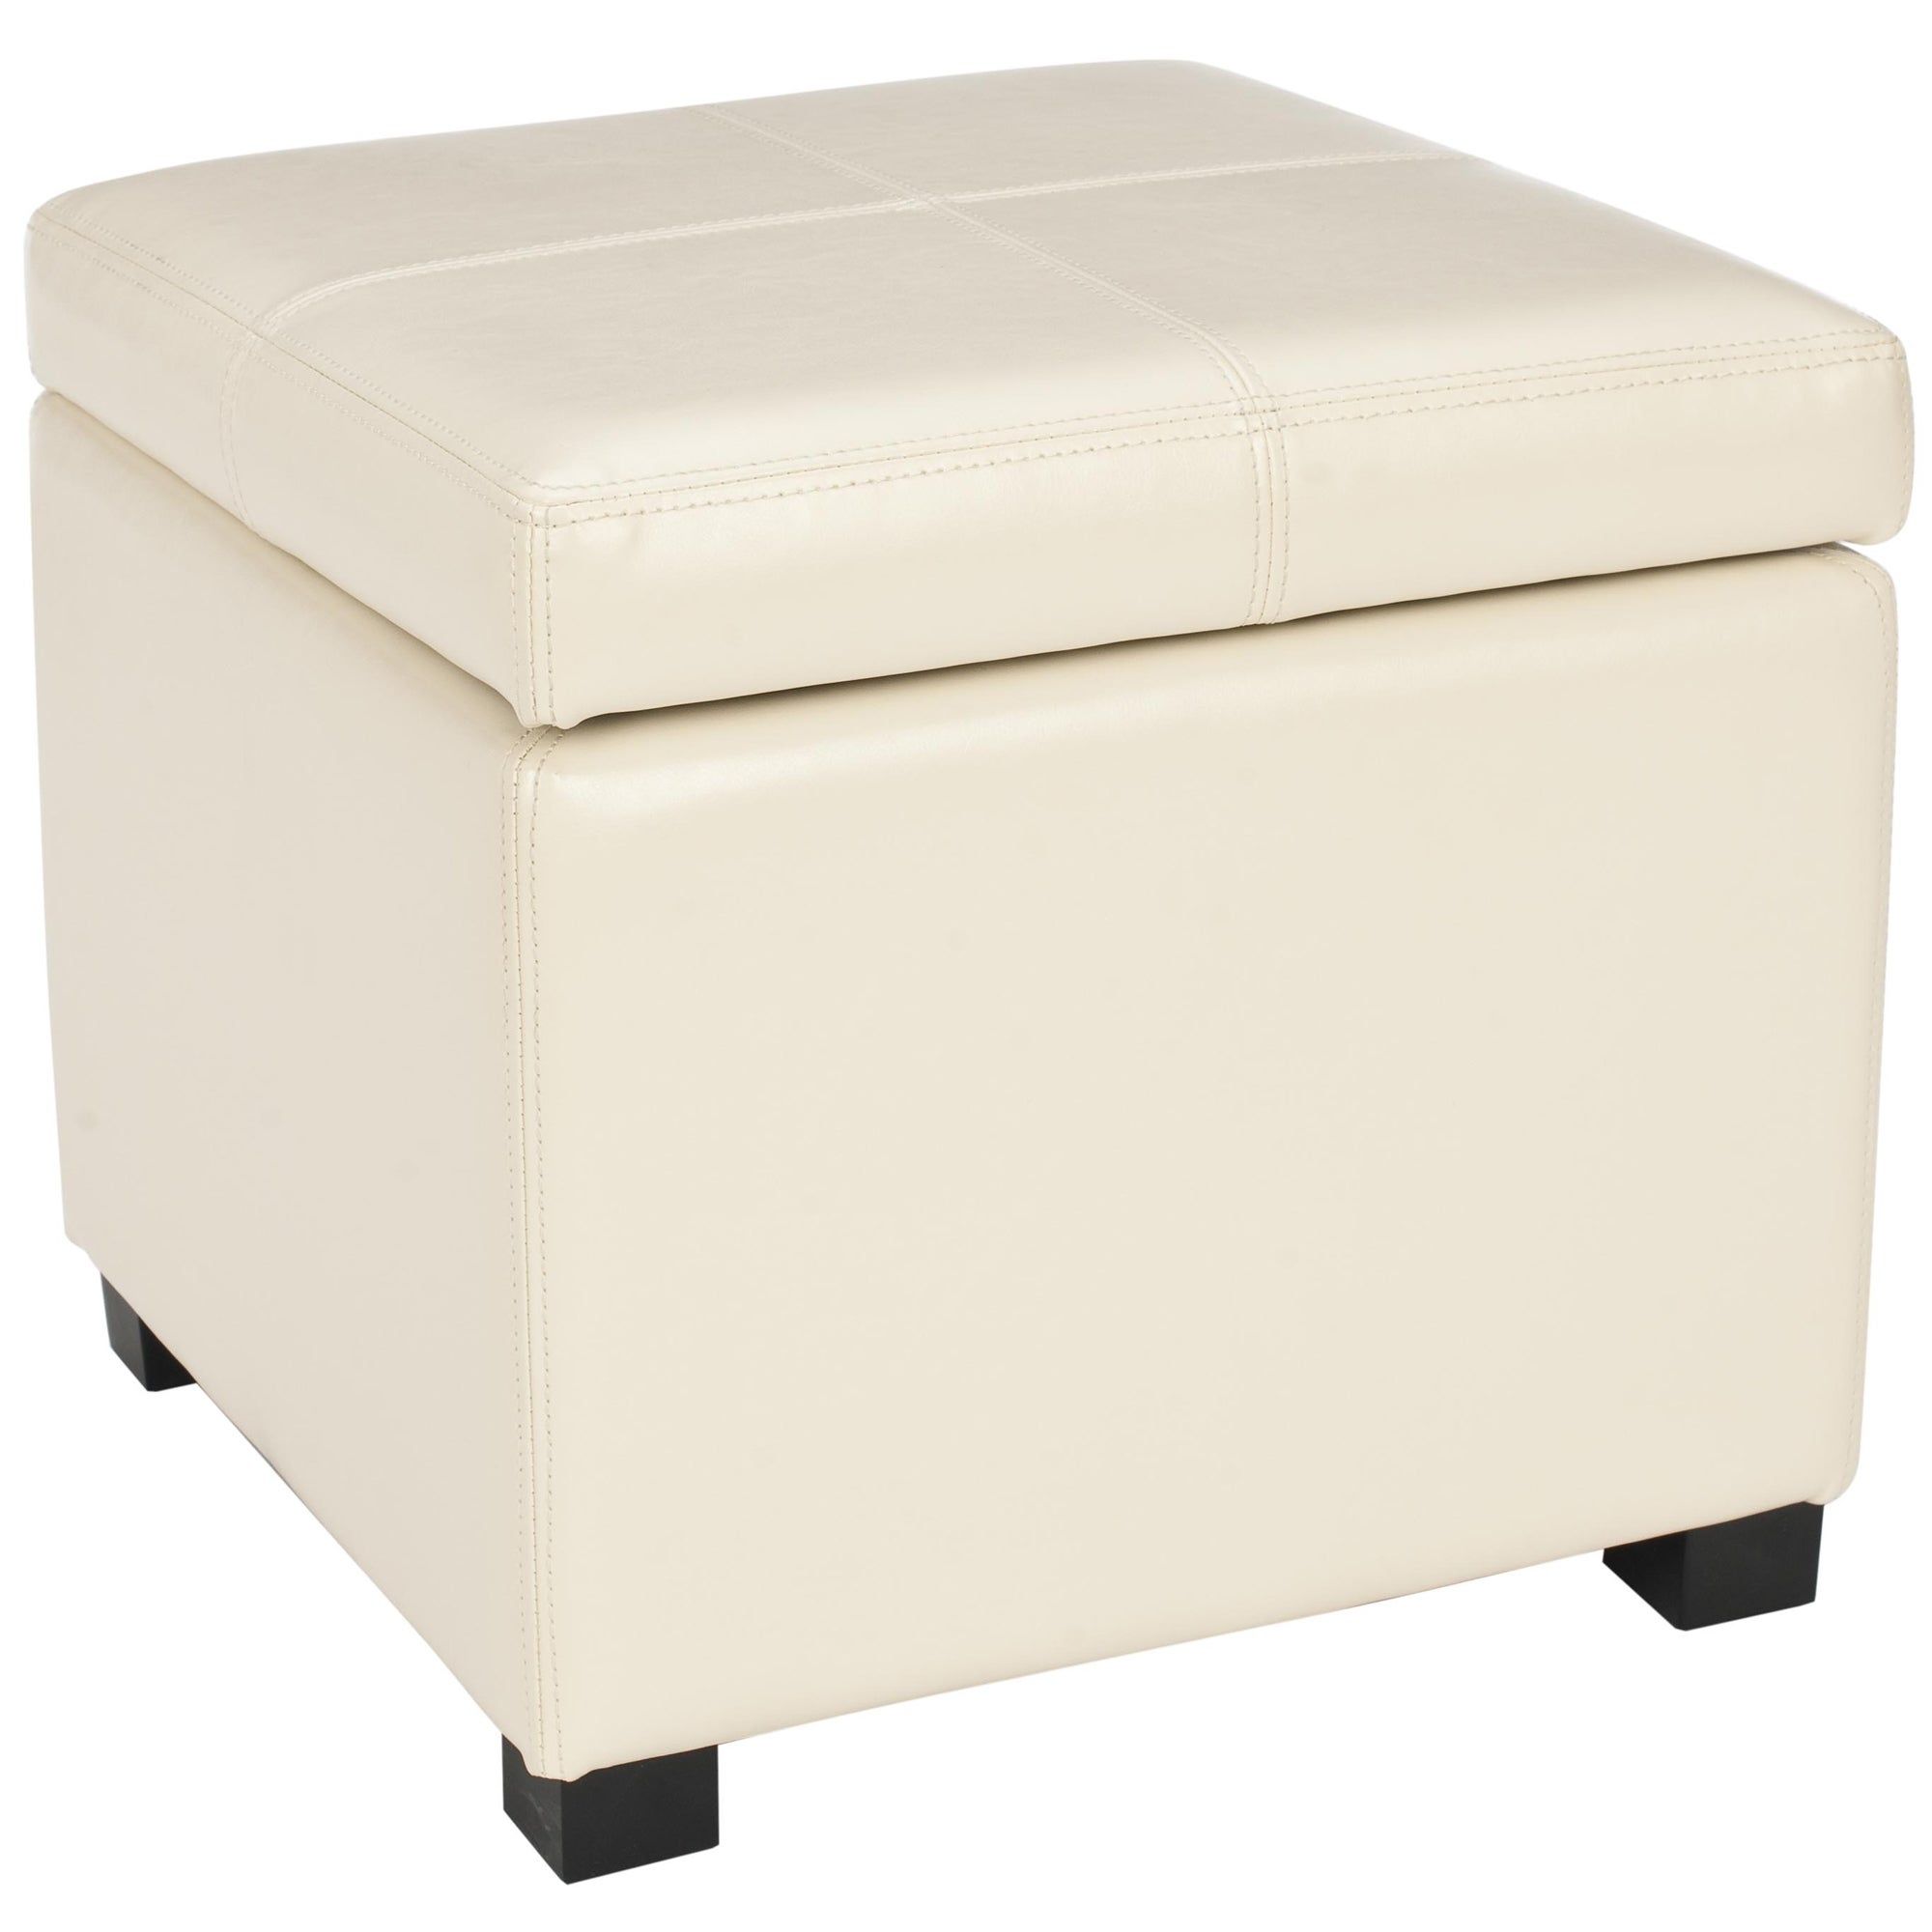 Shop Safavieh Broadway Cream Leather Storage Ottoman – Free Shipping On Within Cream Pouf Ottomans (View 3 of 20)